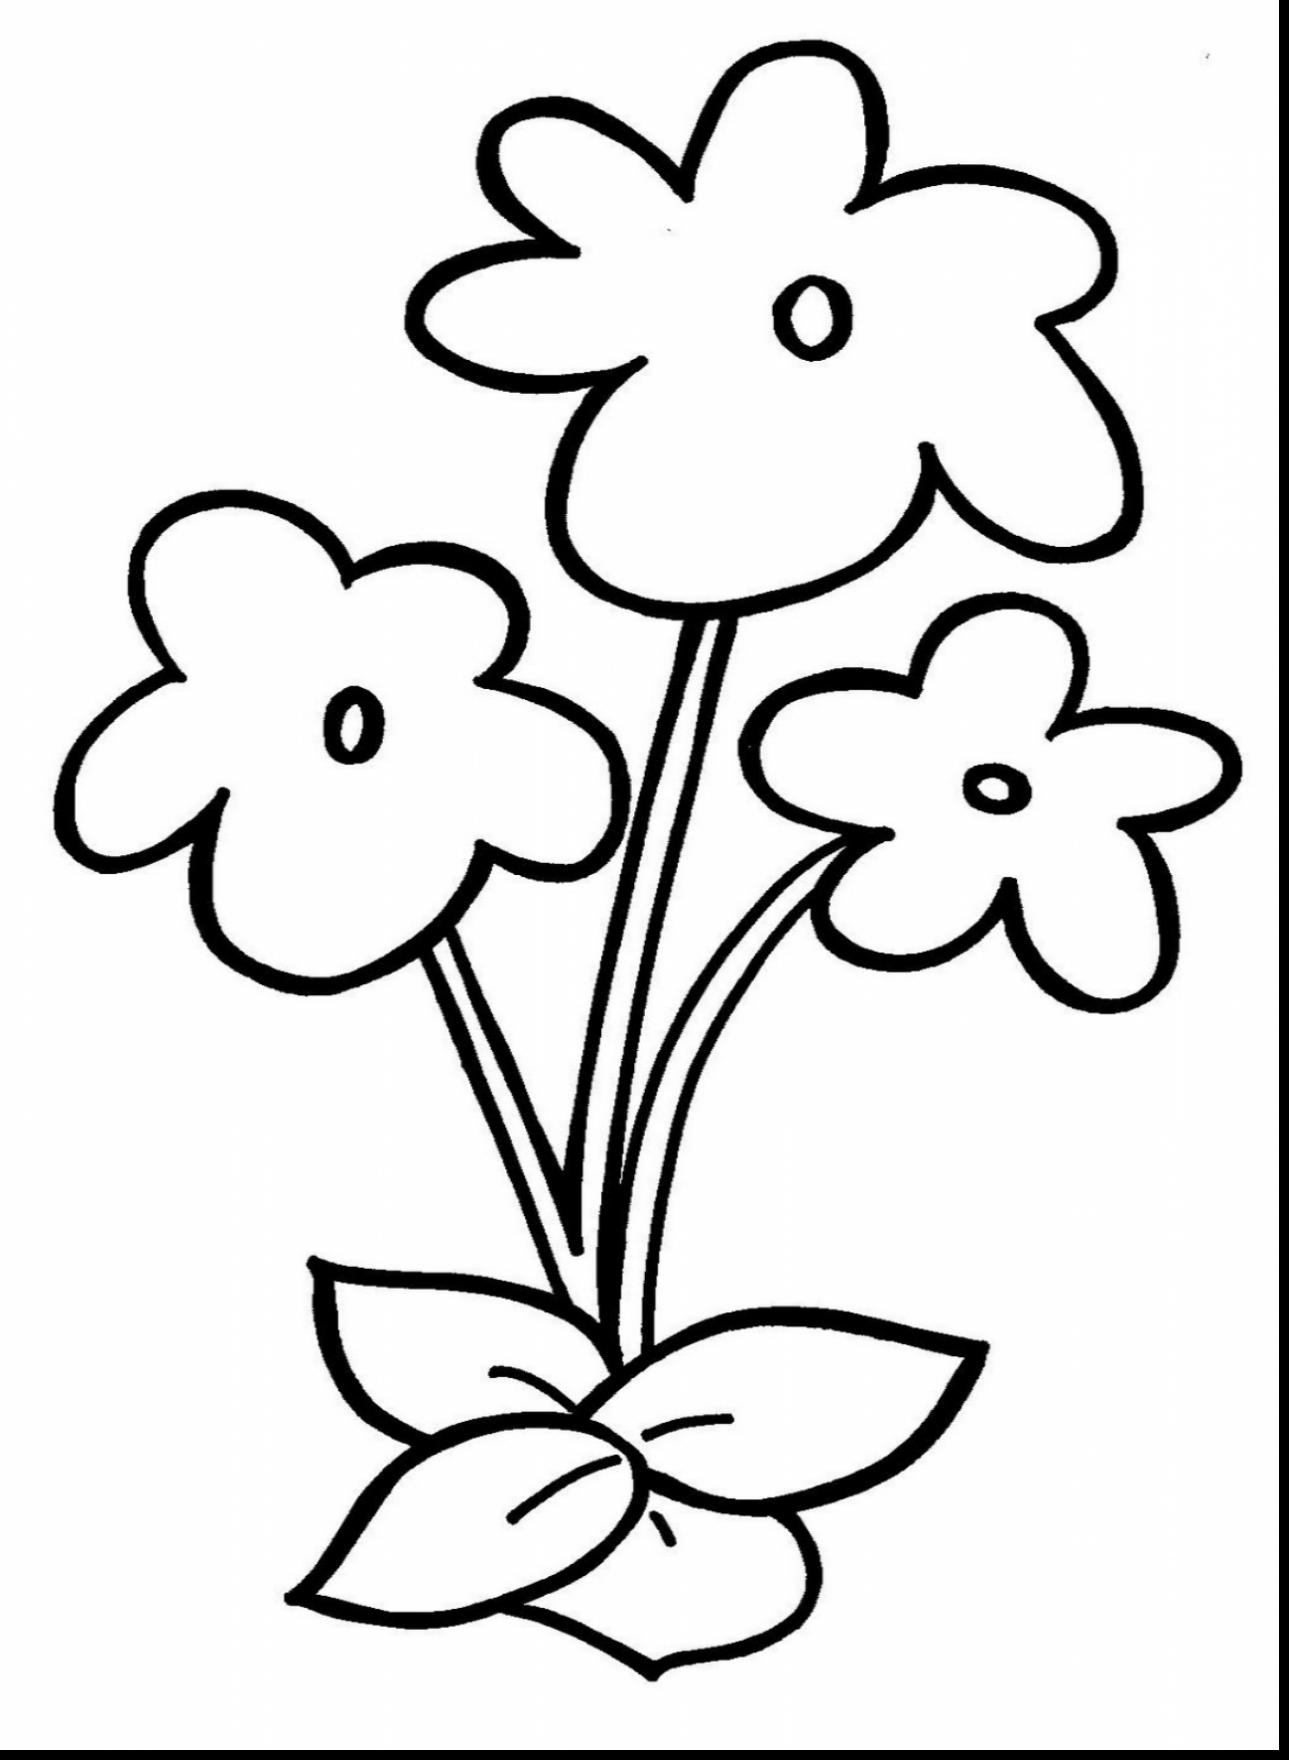 Easy Printable Coloring Pages For Seniors Coloring Pages